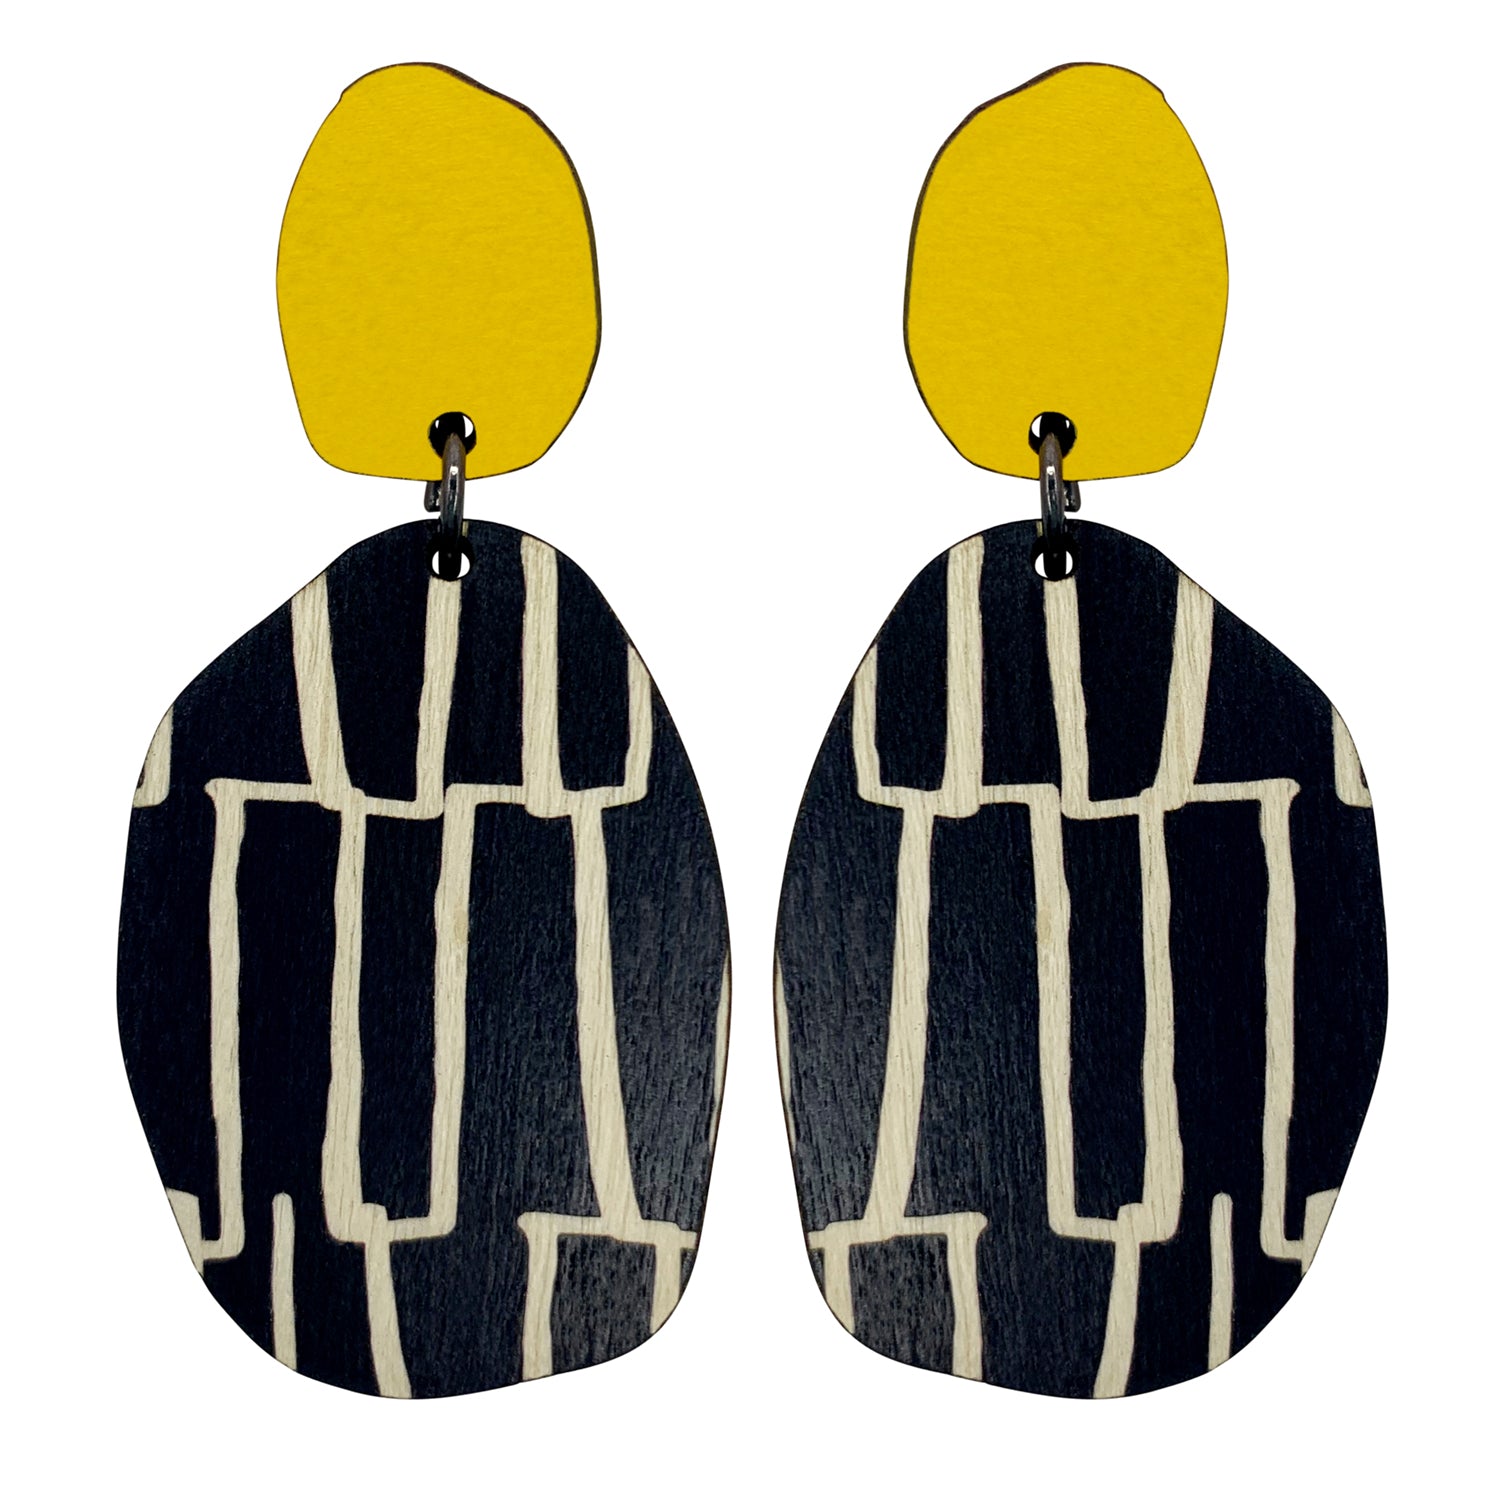 Yellow and City pattern earrings